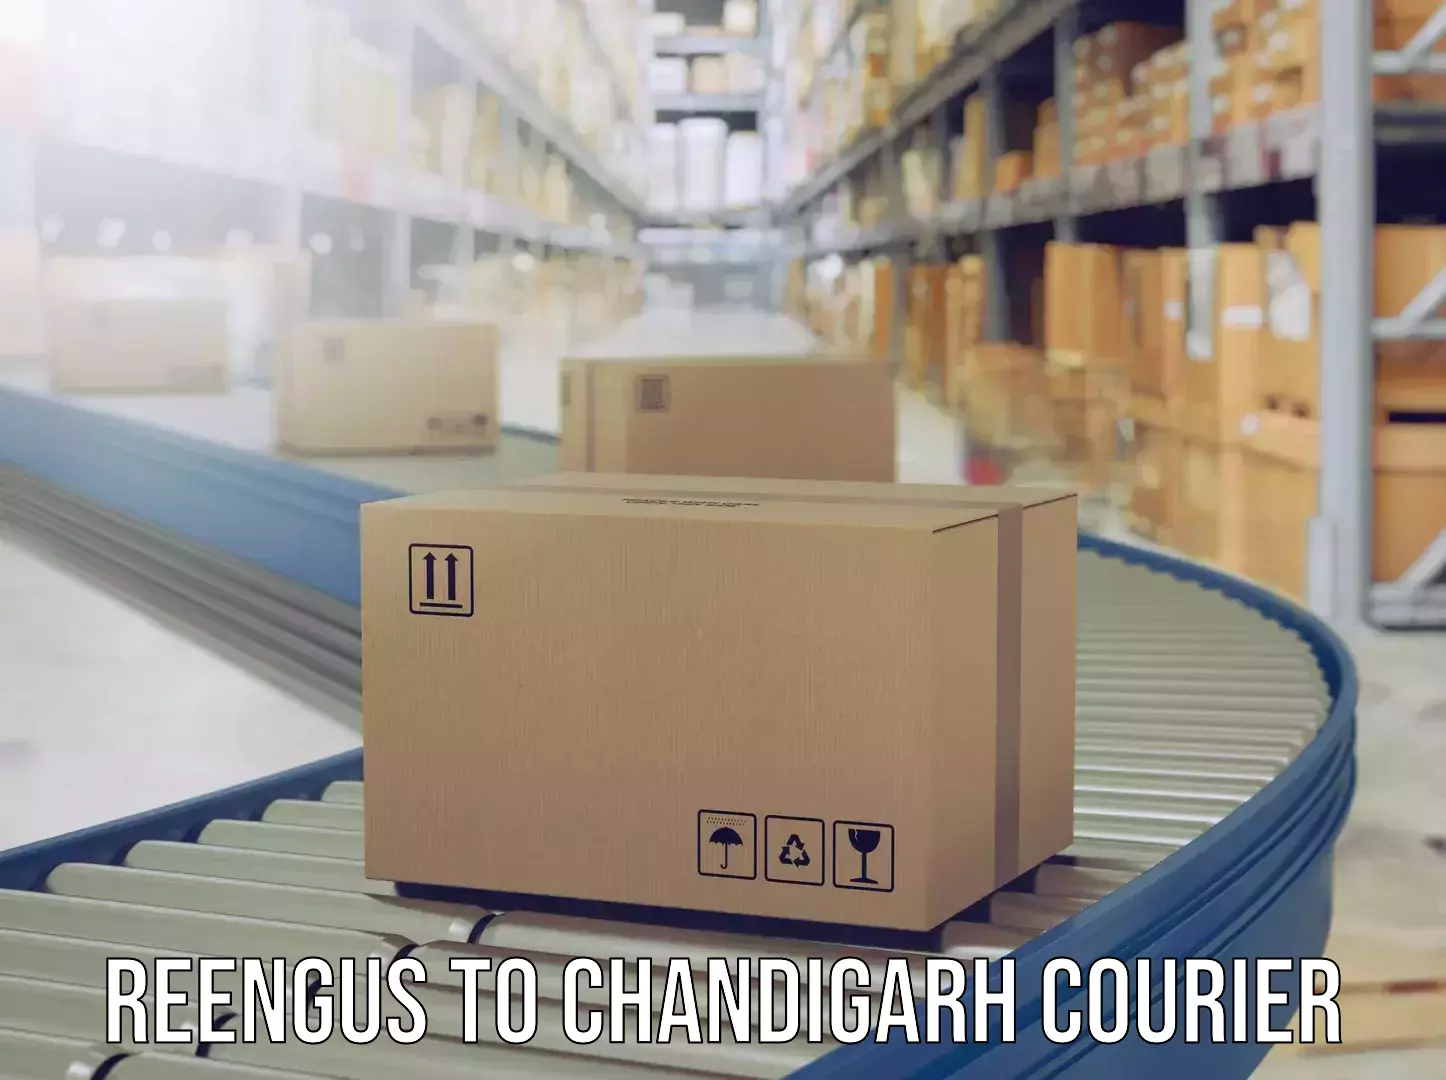 Luggage shipment specialists Reengus to Chandigarh